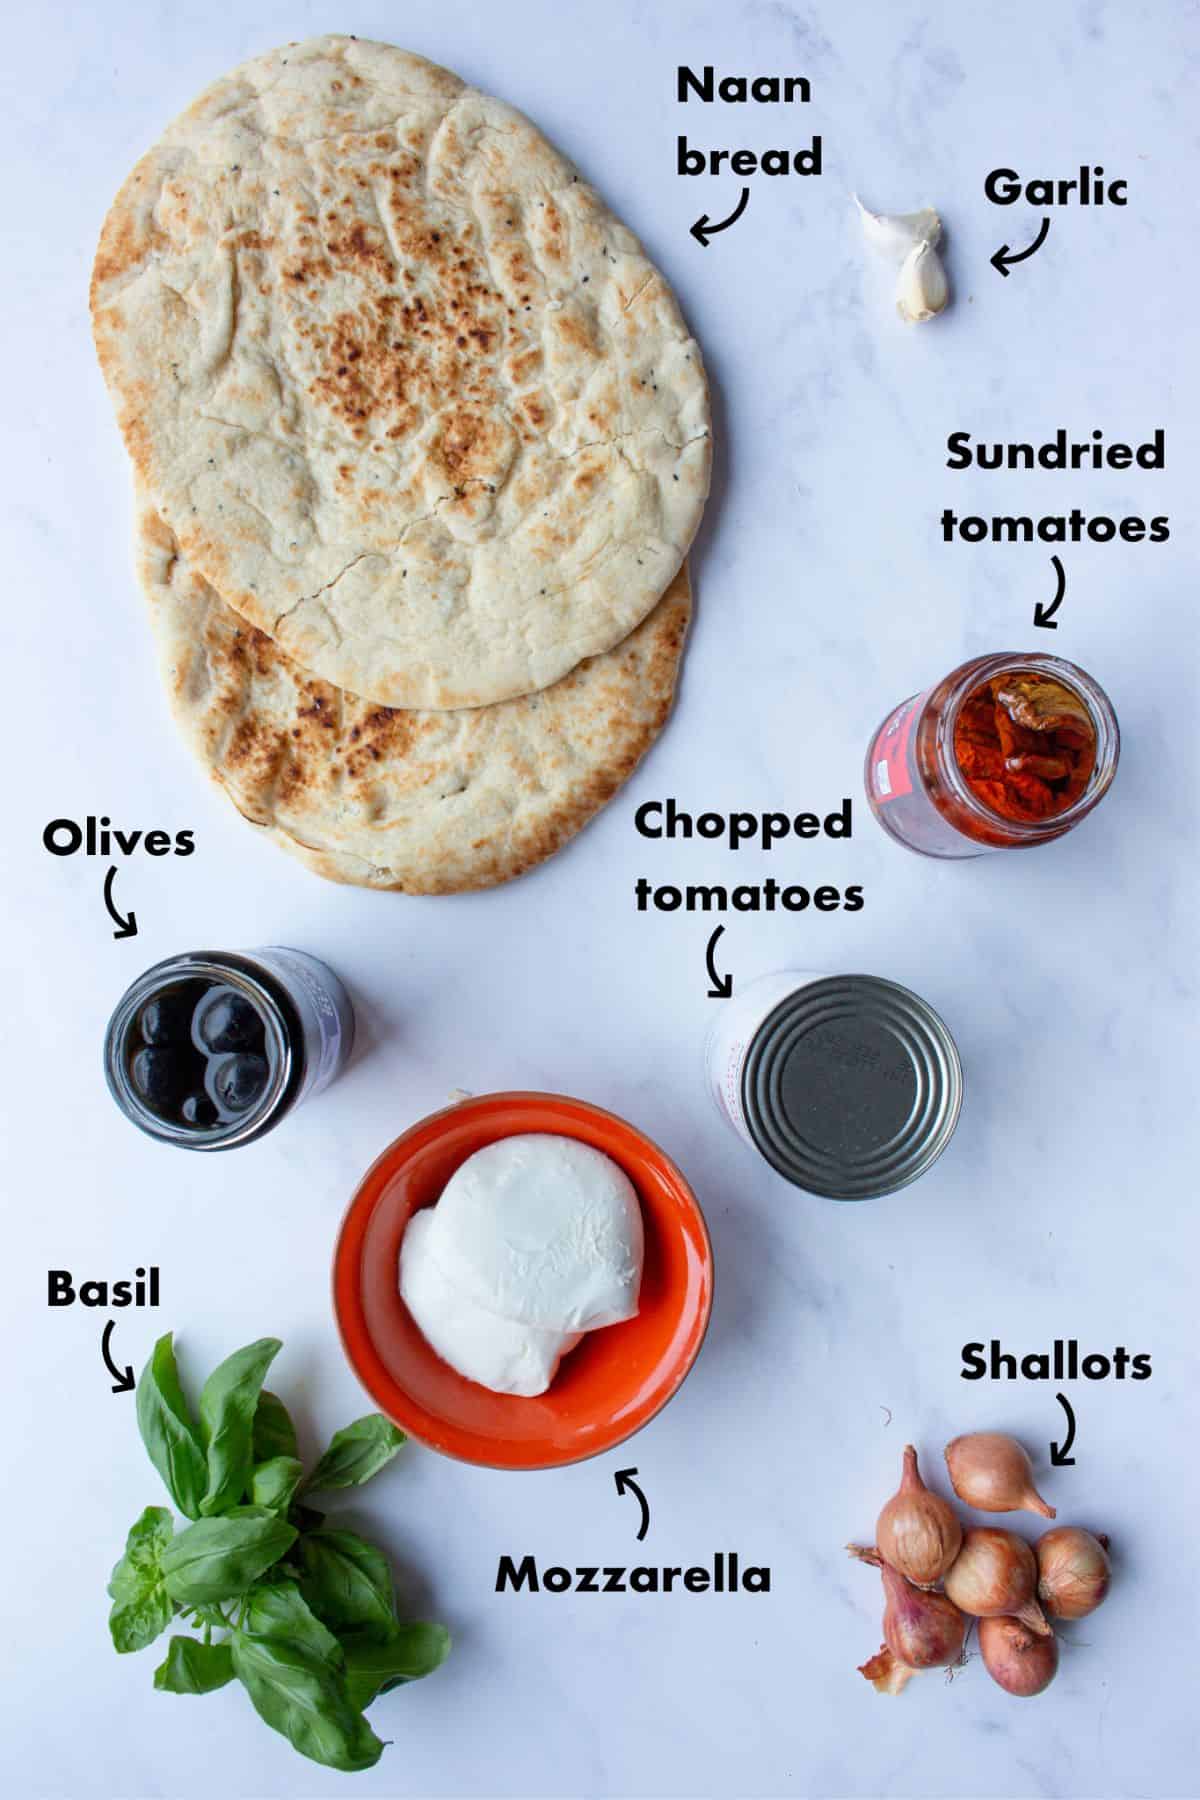 Ingredients to make naan bread pizzas laid out on a greyish background and labelled.